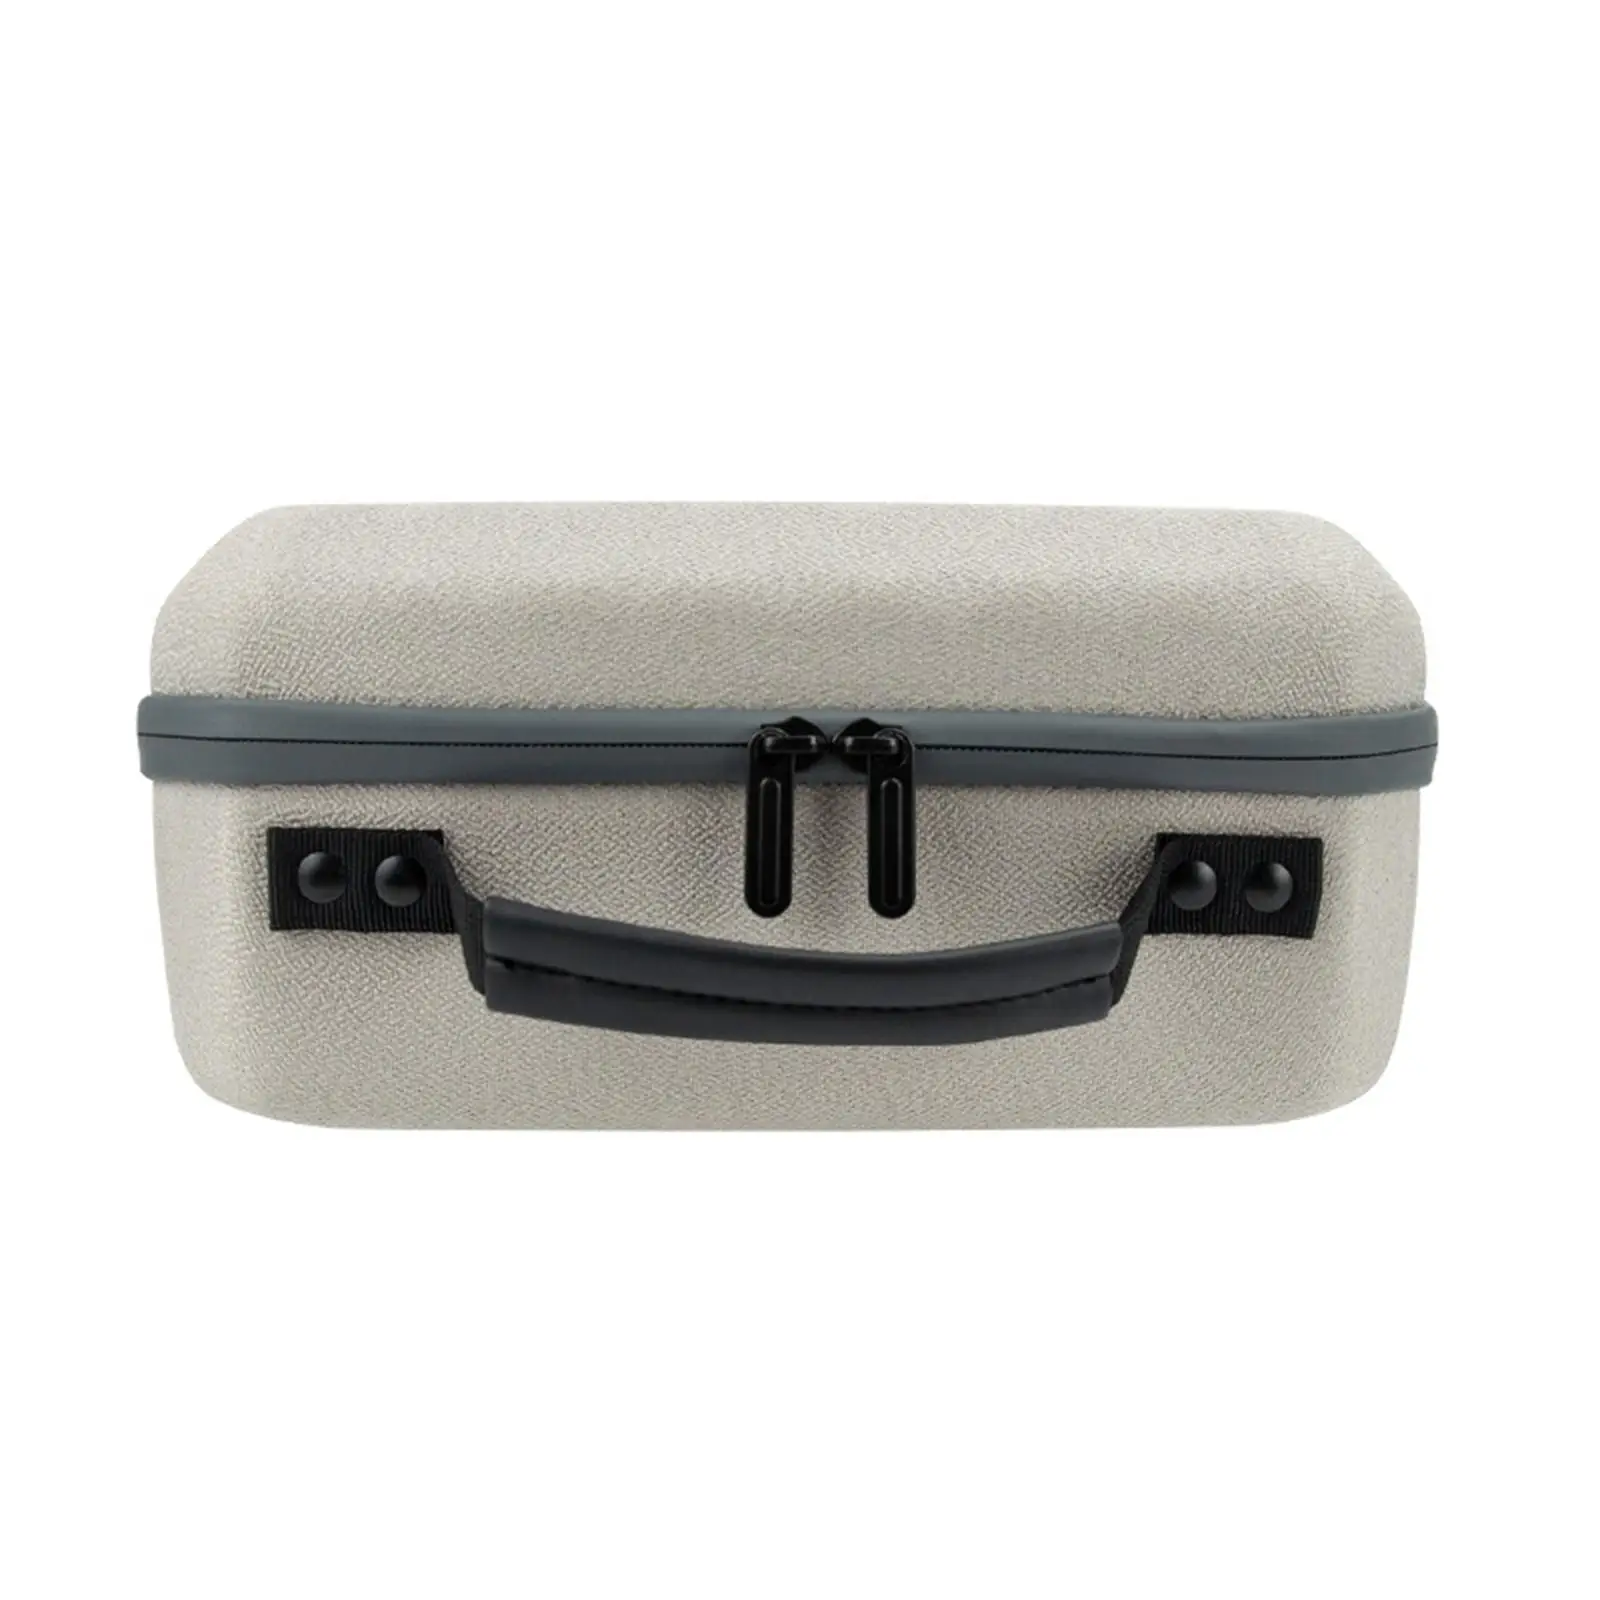 Bag Storage Carry Case with Accessories Storage Pockets Oxford Fabric Sleeve for Mini Video